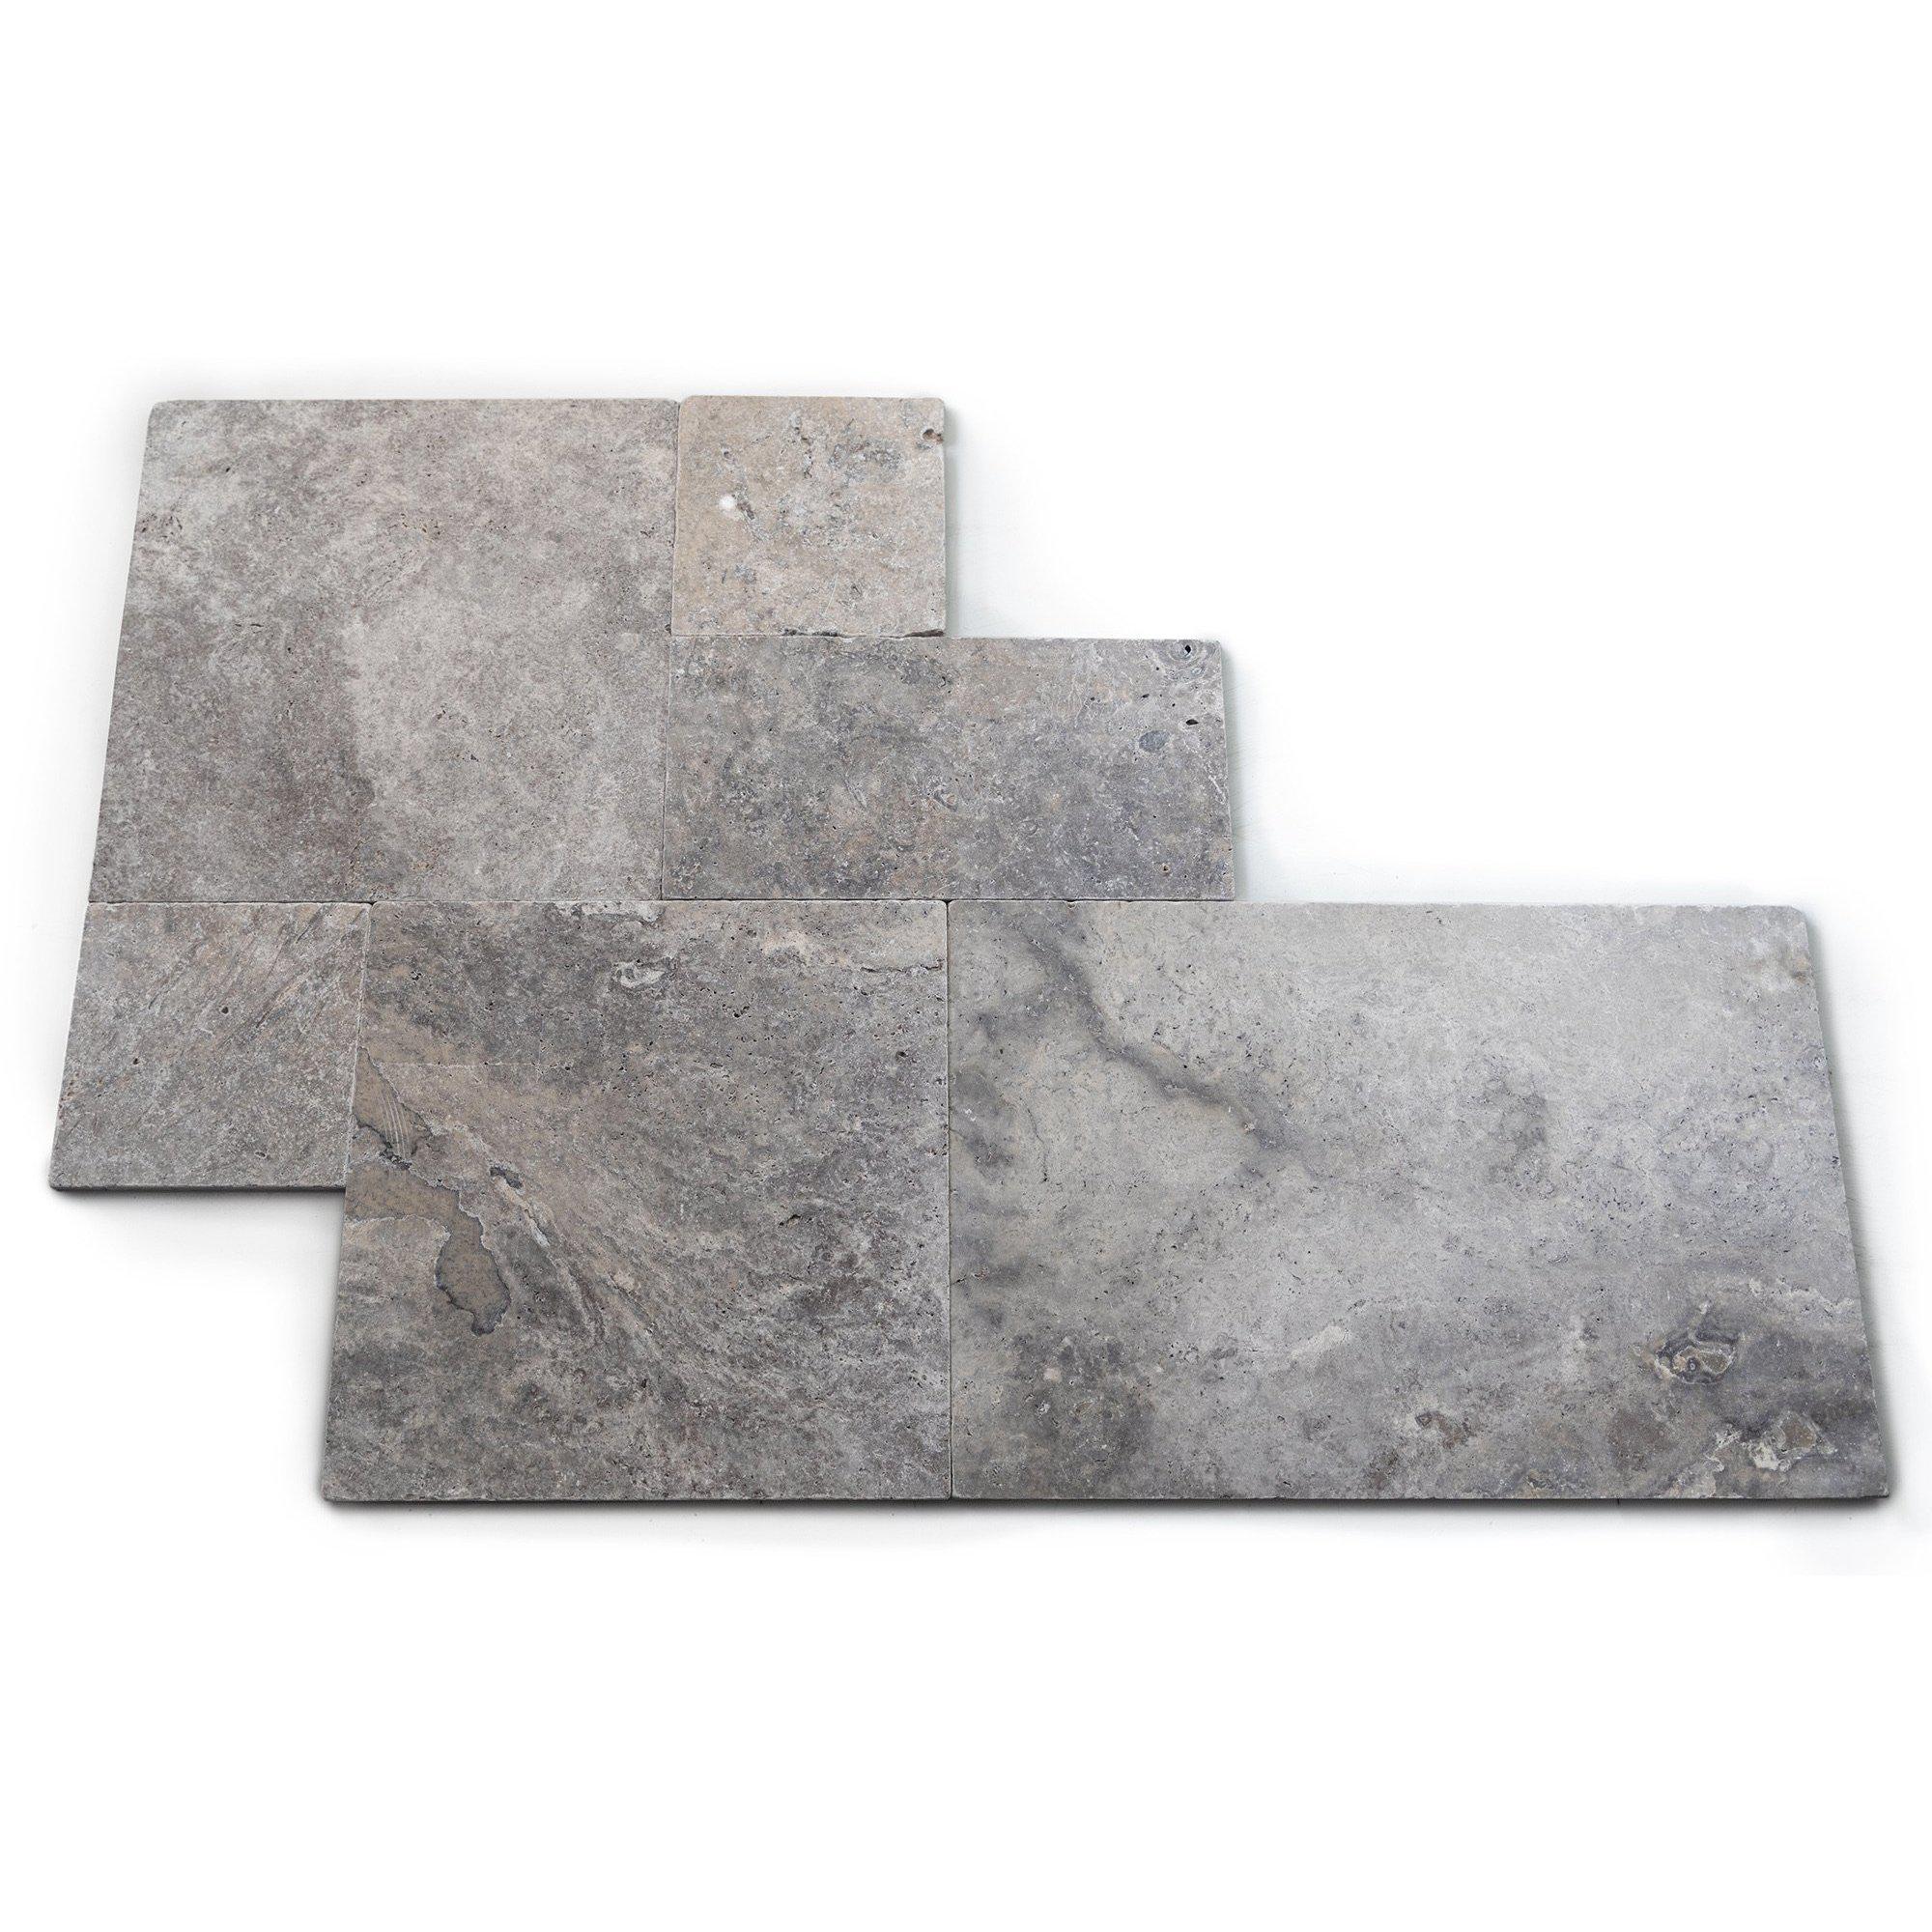 Tumbled Travertine Tile & Paver - French Set 30mm - Premium Silver Stone and Rock